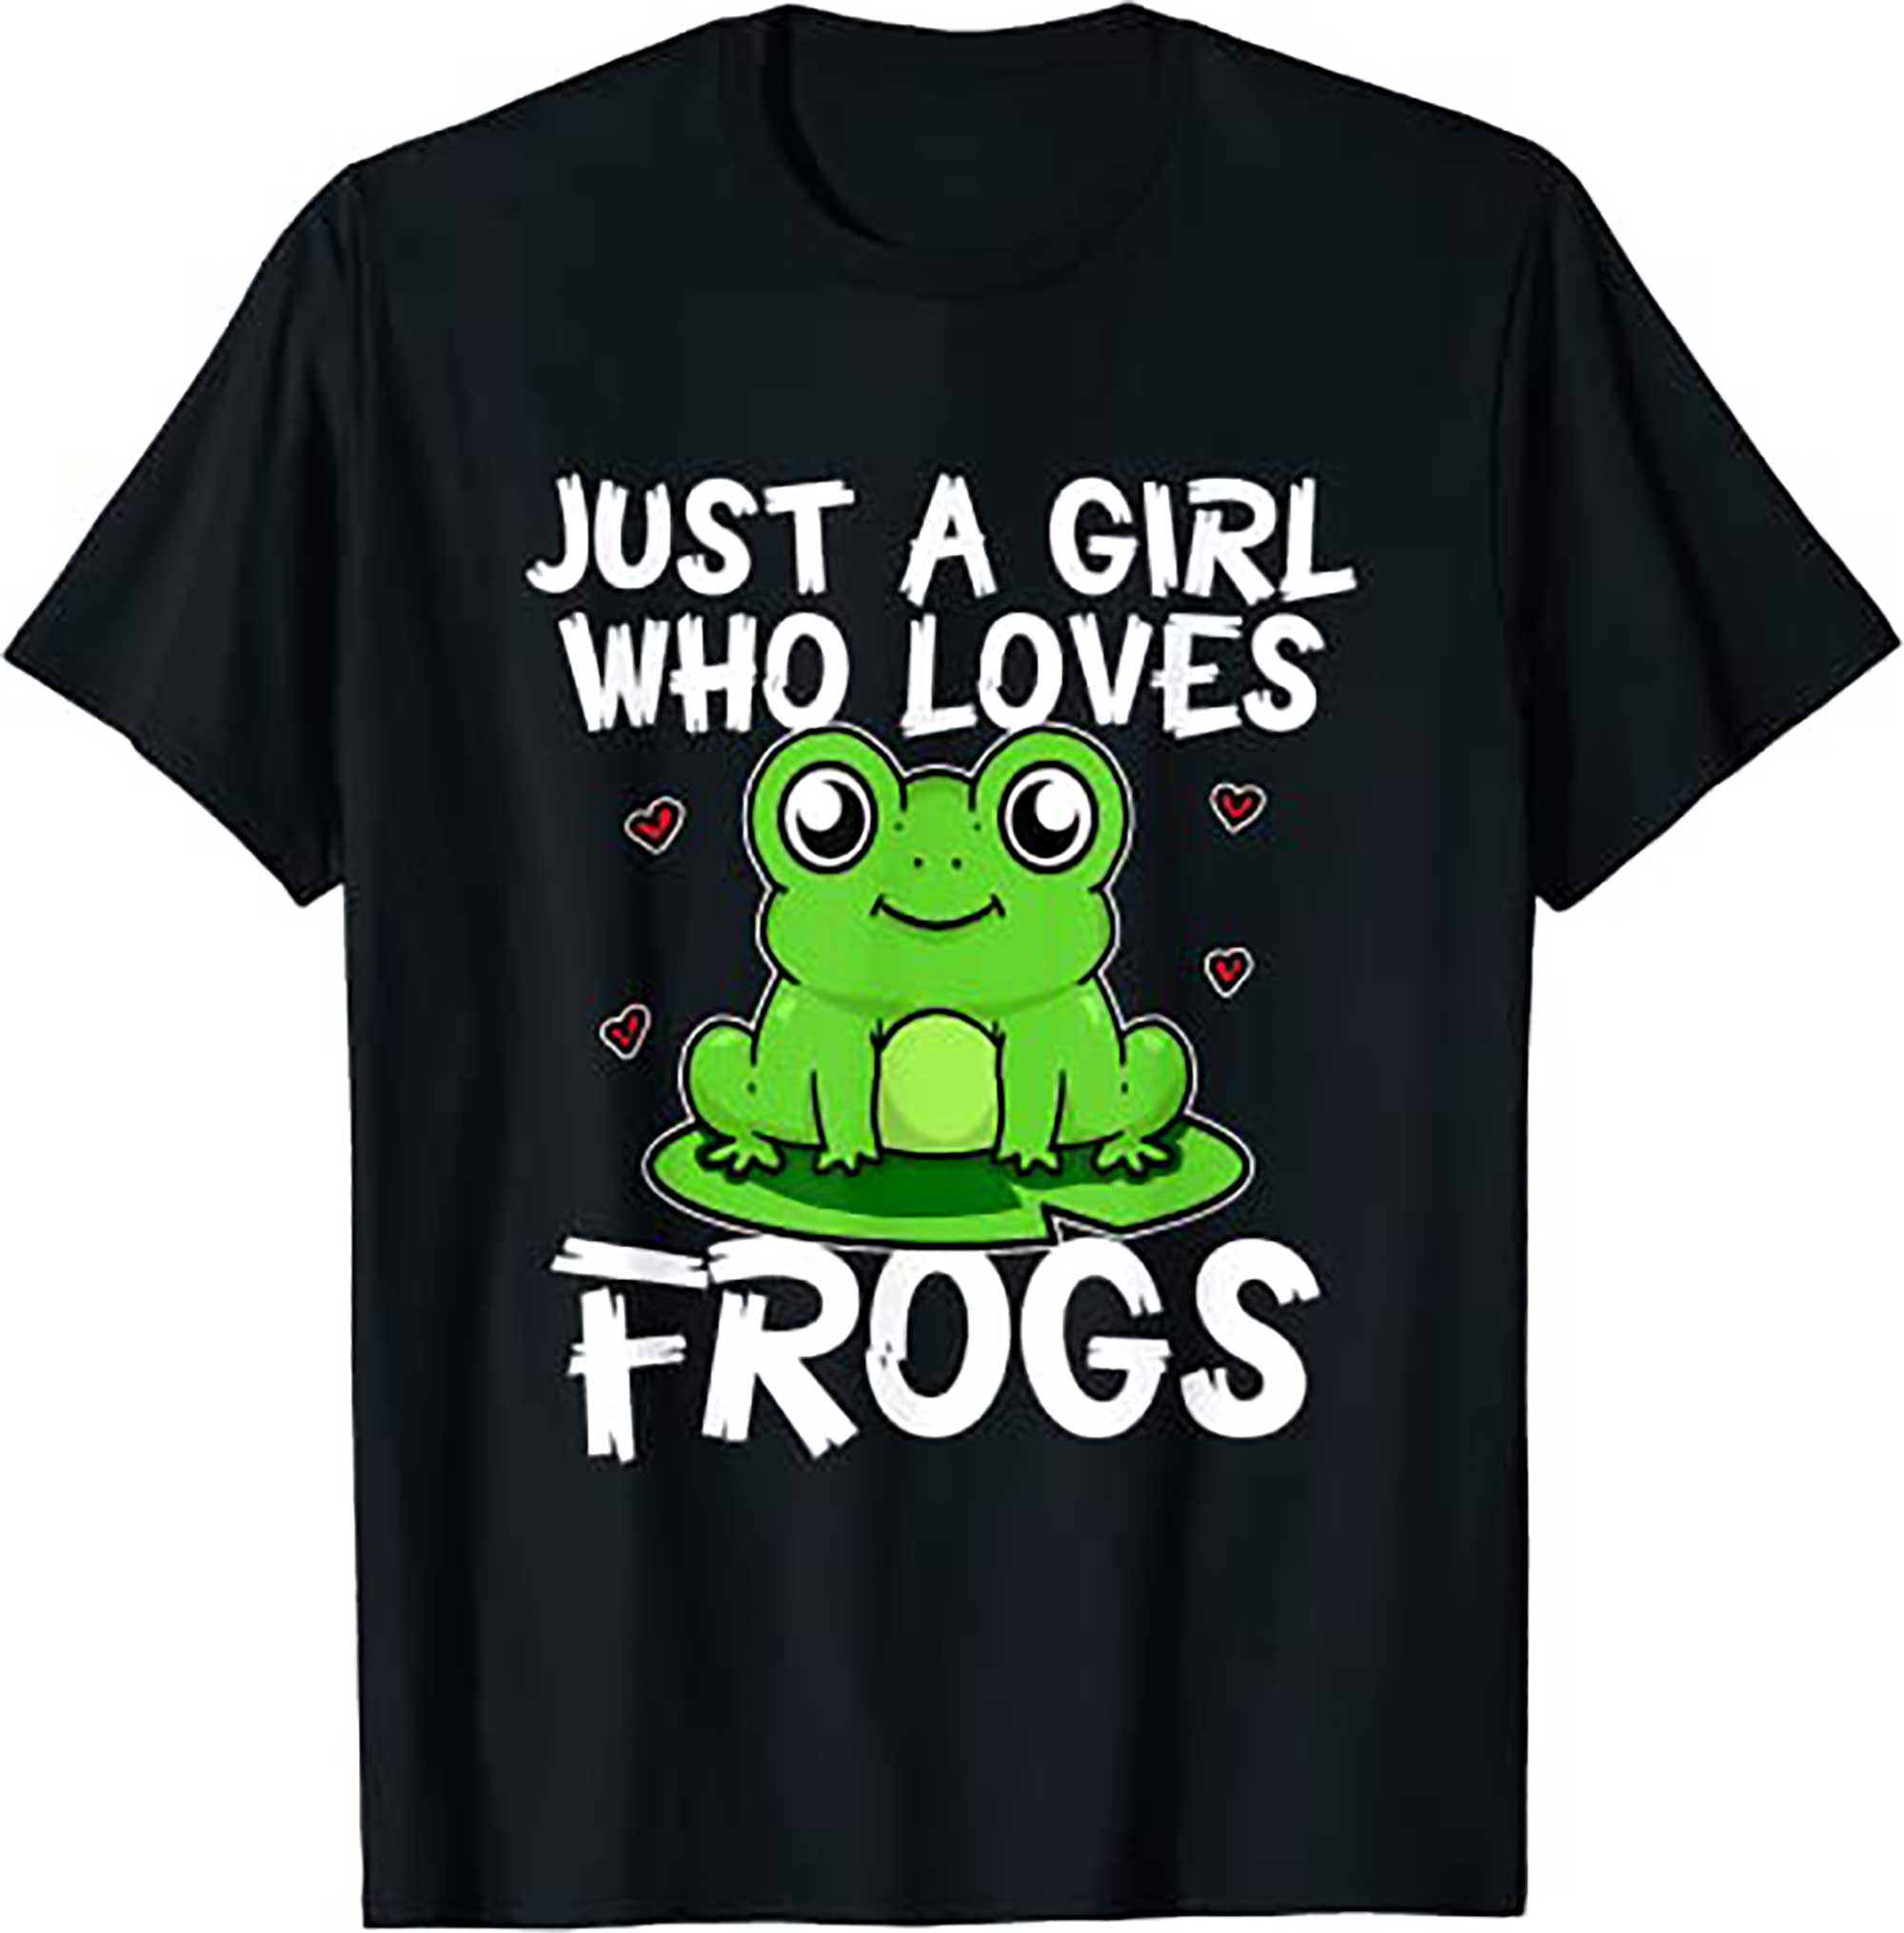 Just A Girl Who Loves Frogs Cute Green Frog Costume T Shirt